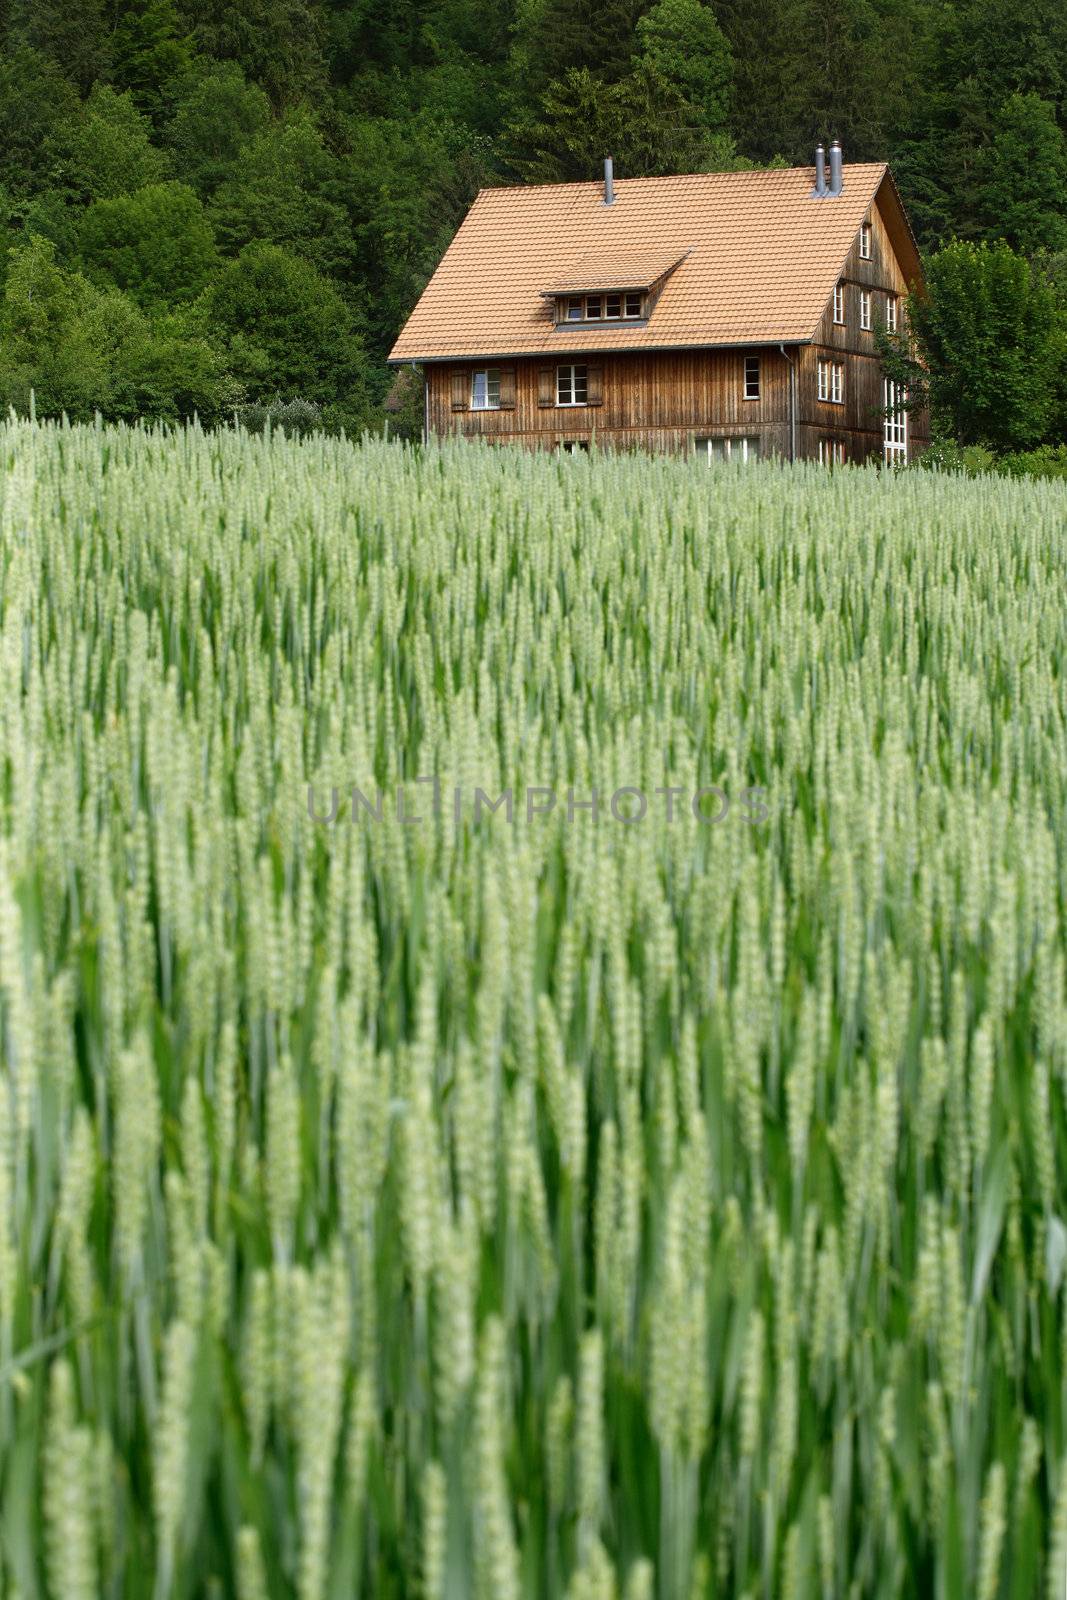 A selective focus image of a house off in the distance of a wheat field in the beginning of summer.  House is in a small rural area of Switzerland.  Focus is on the house.
